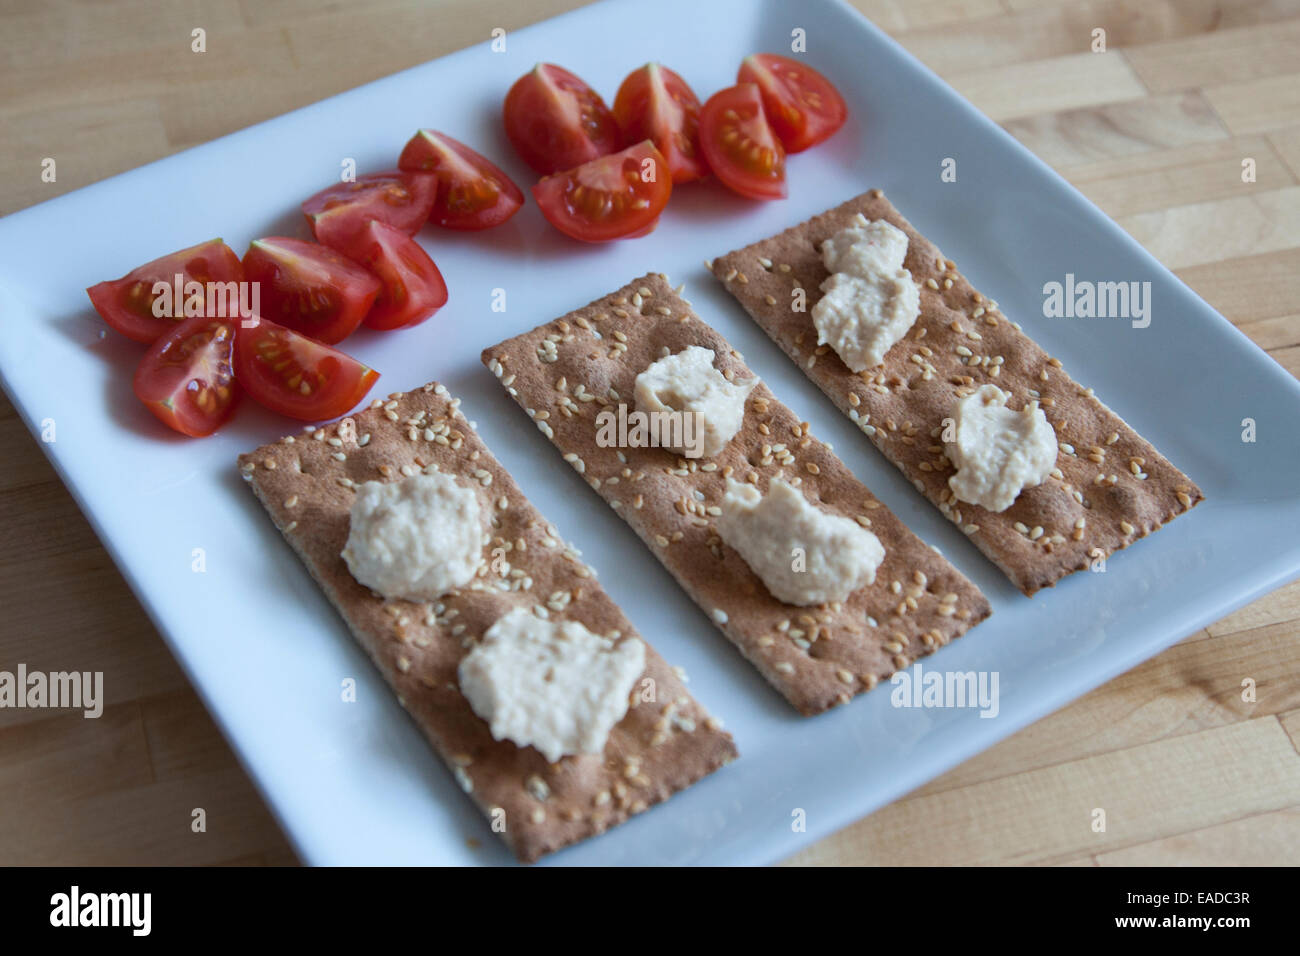 Simple snack of ak-mak crackers, humus, and sliced cherry tomatoes on a square plate. Stock Photo